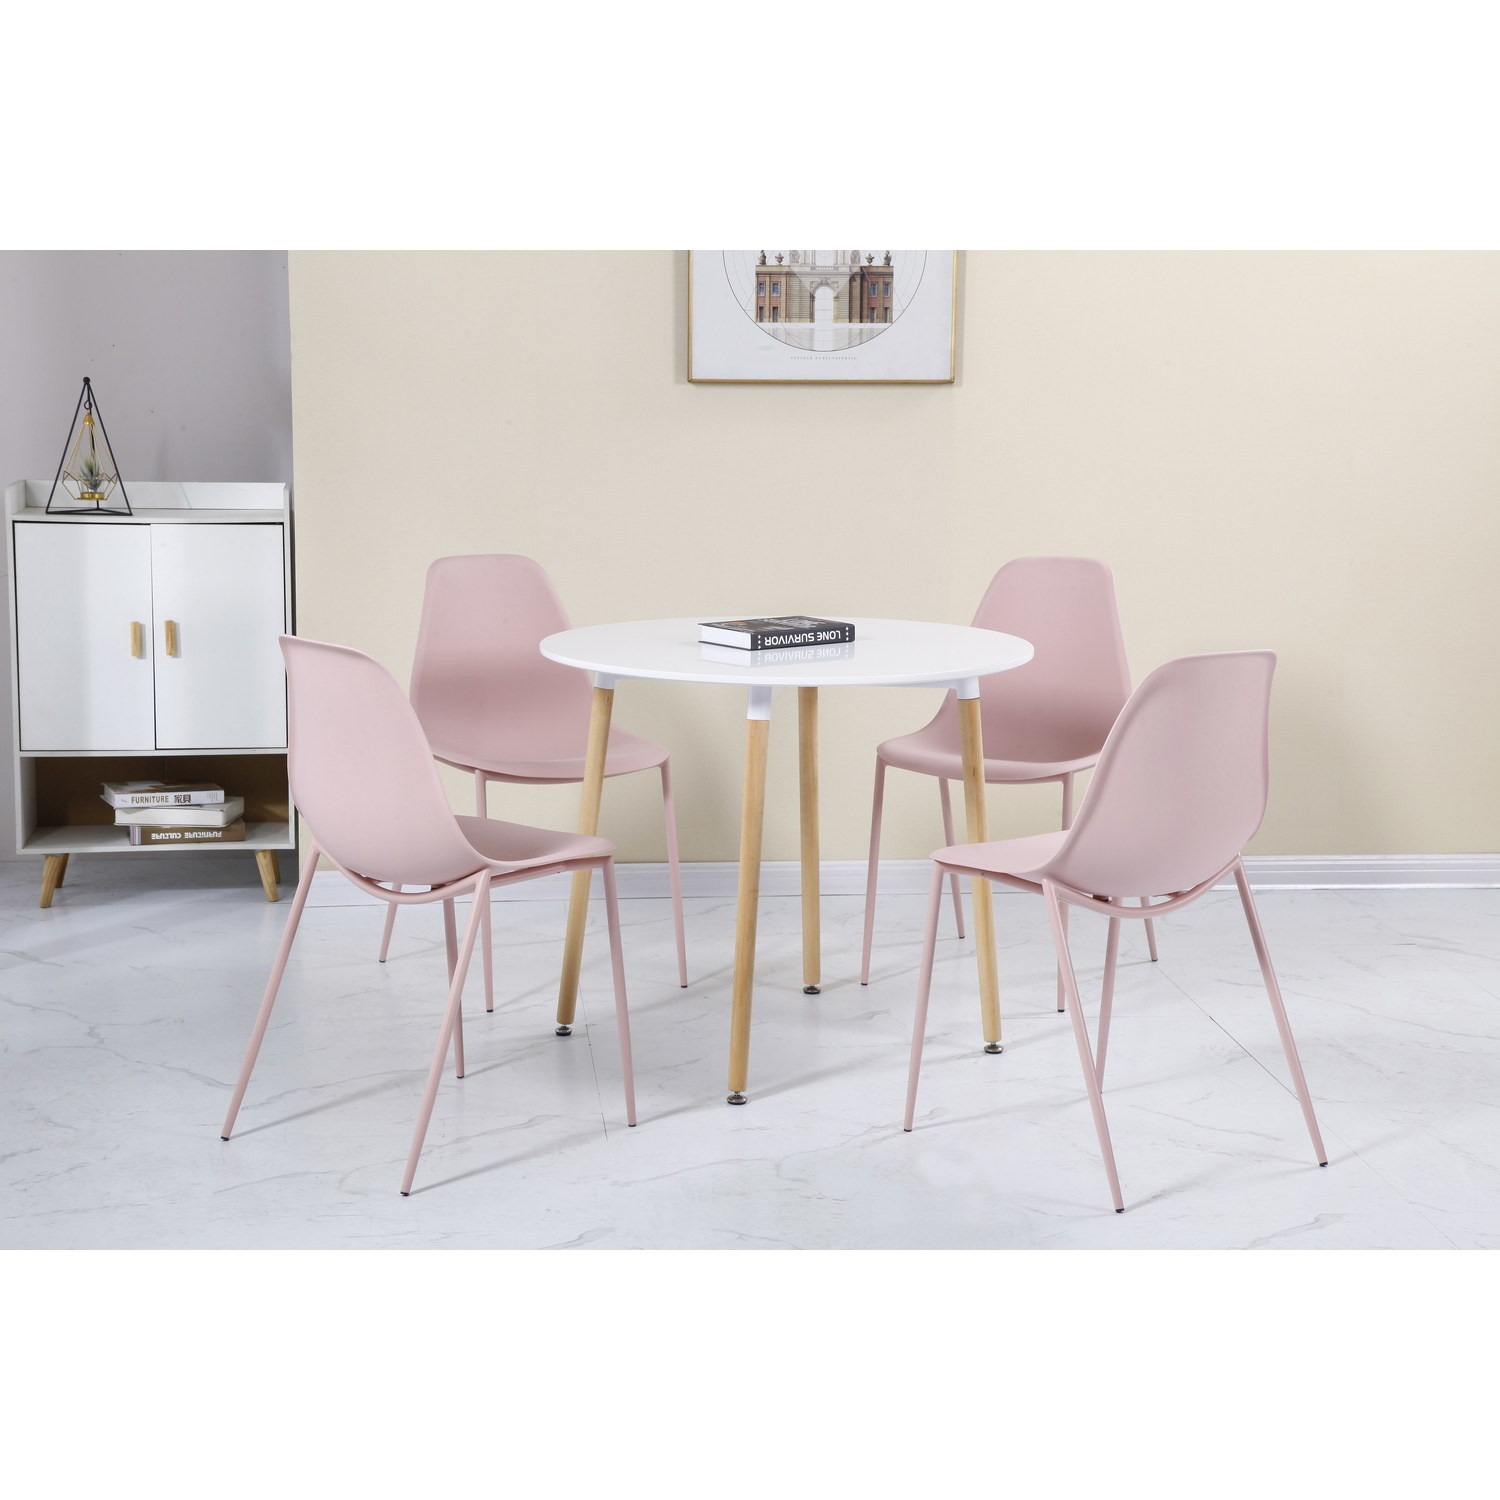 Photo of Lindon white and oak dining set 4 pink chairs